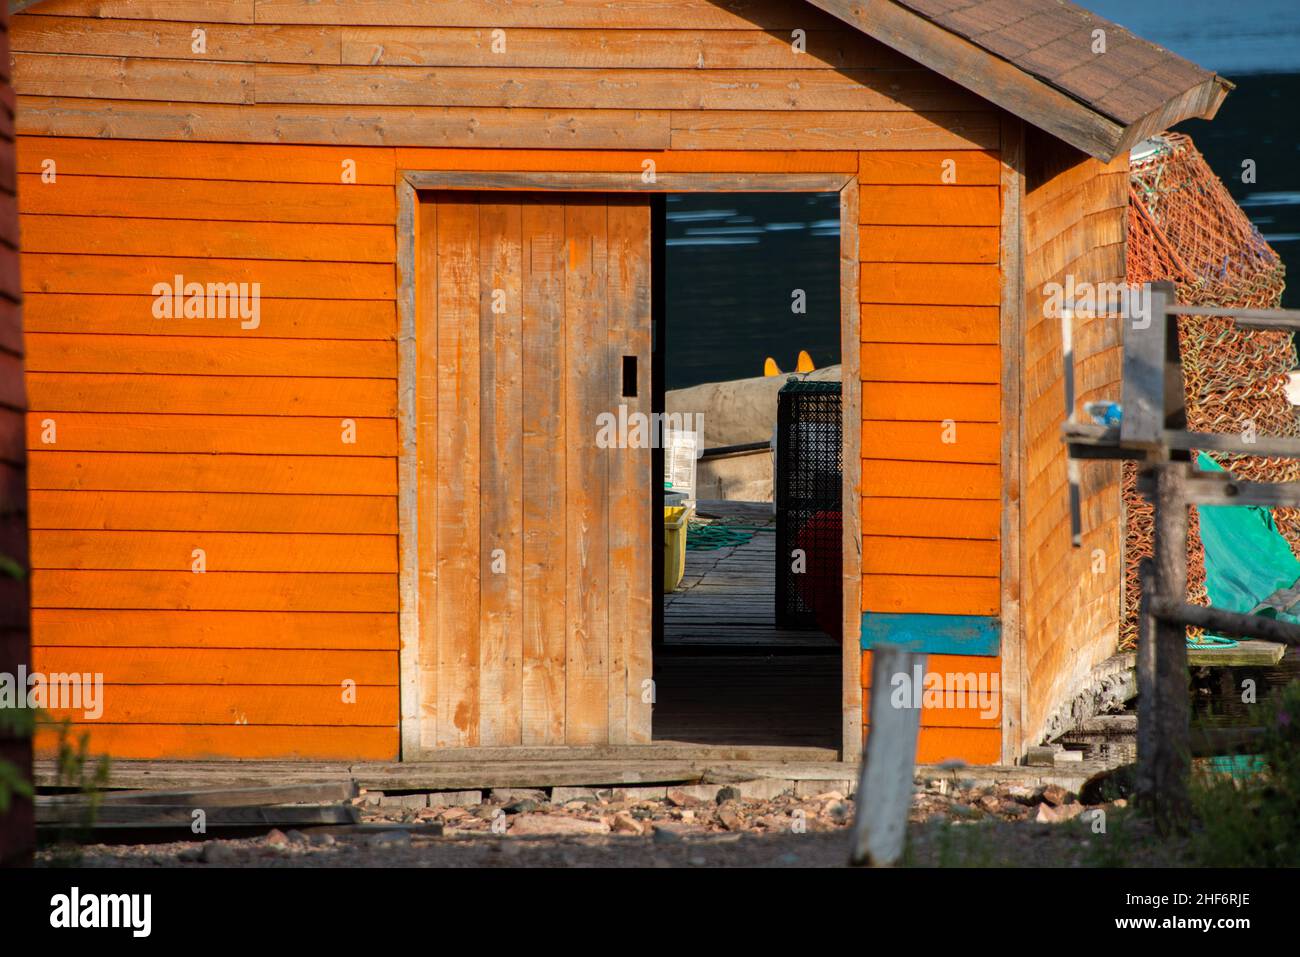 Orange wooden fishing shed for storing fishing gear and boats. The building has a worn wooden door, window, peaked roof, fishing rope, and gear. Stock Photo